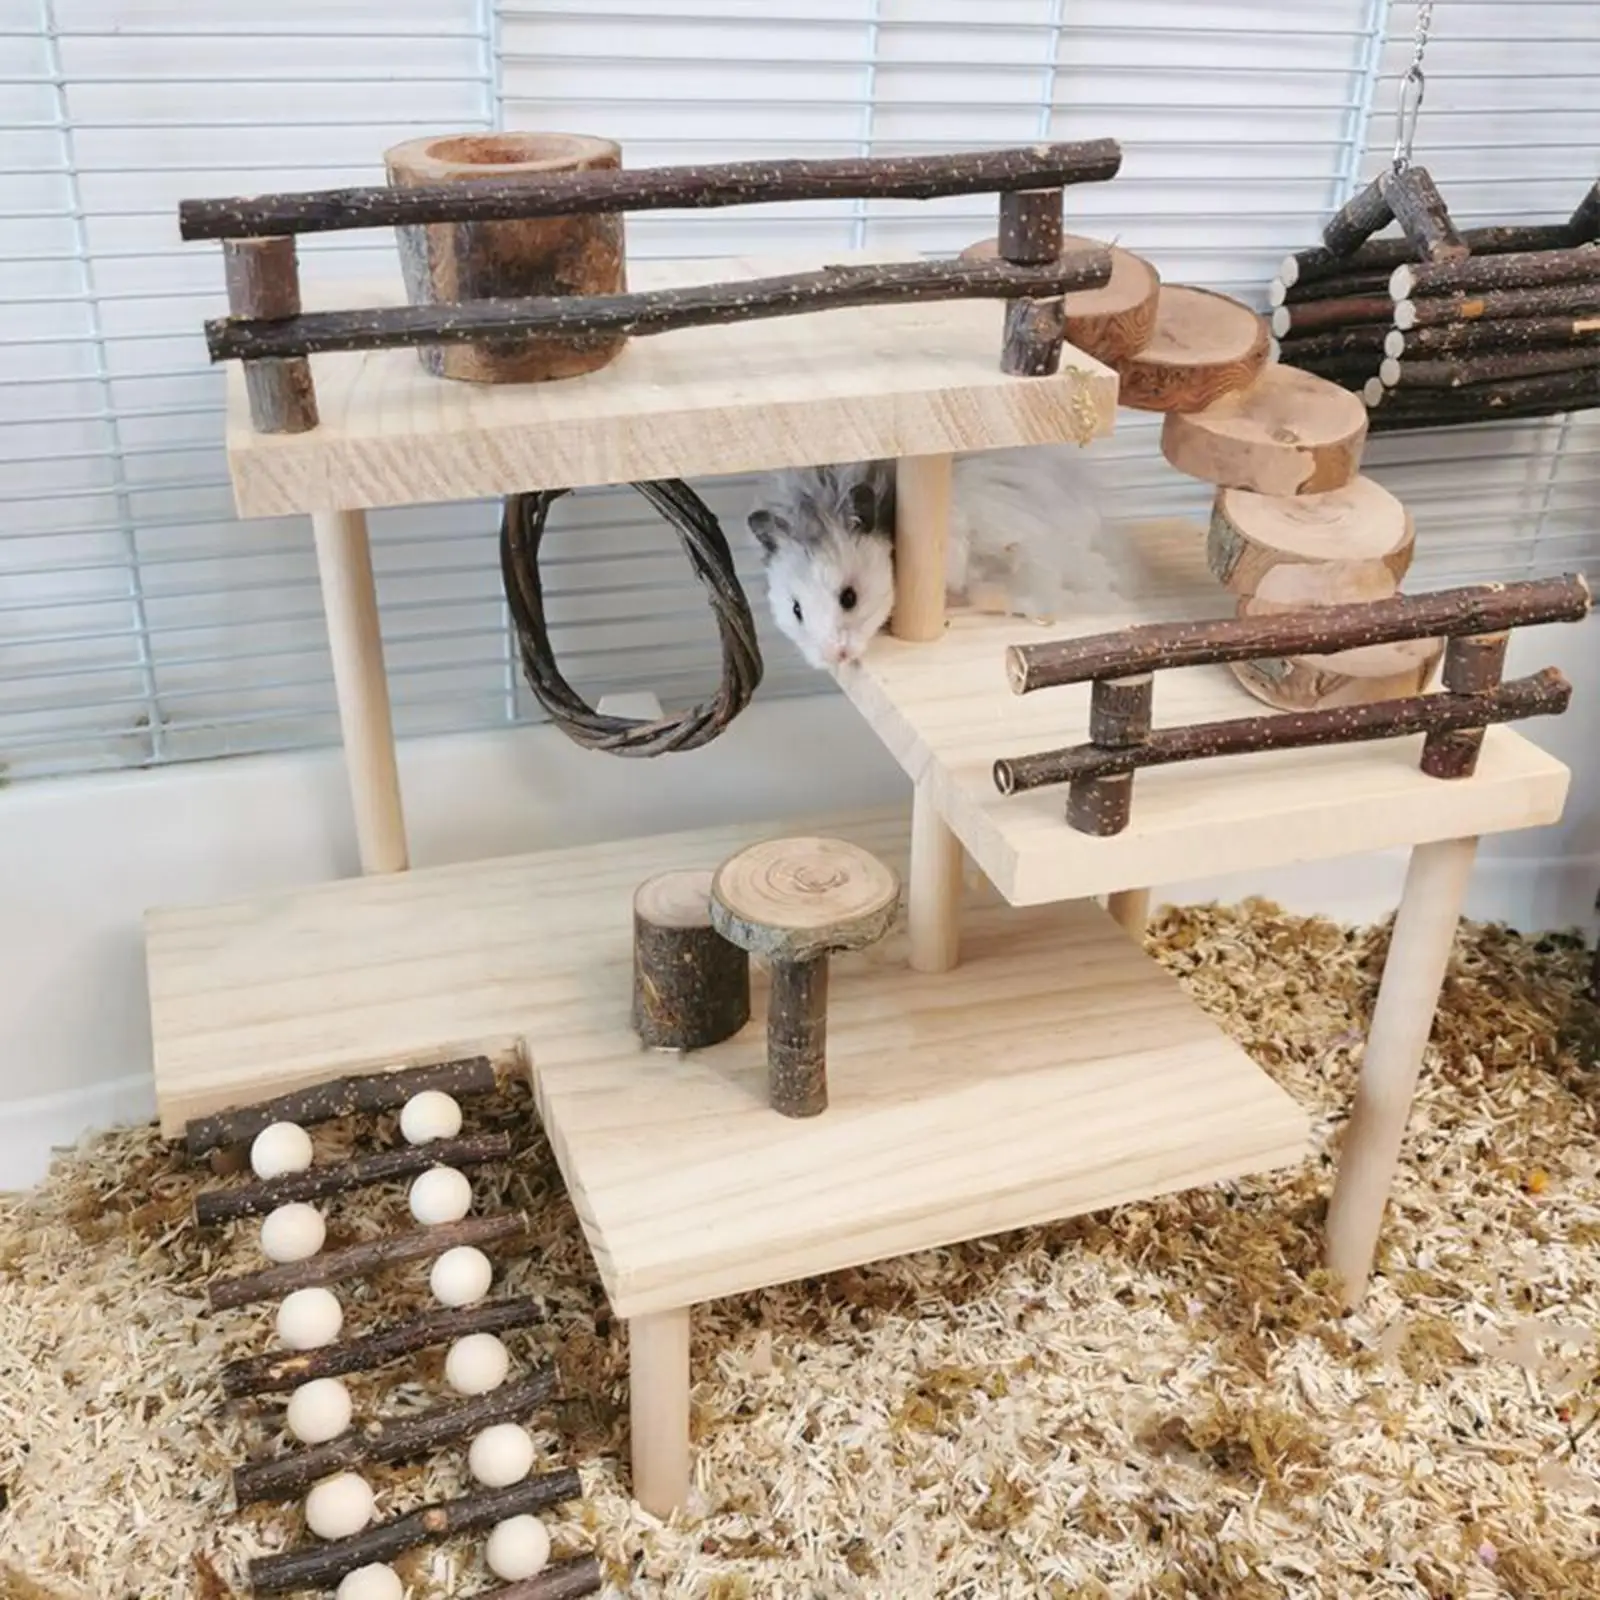 Hamster Toy Wooden Platform for Pets Activity Set Cage Accessories Exercise